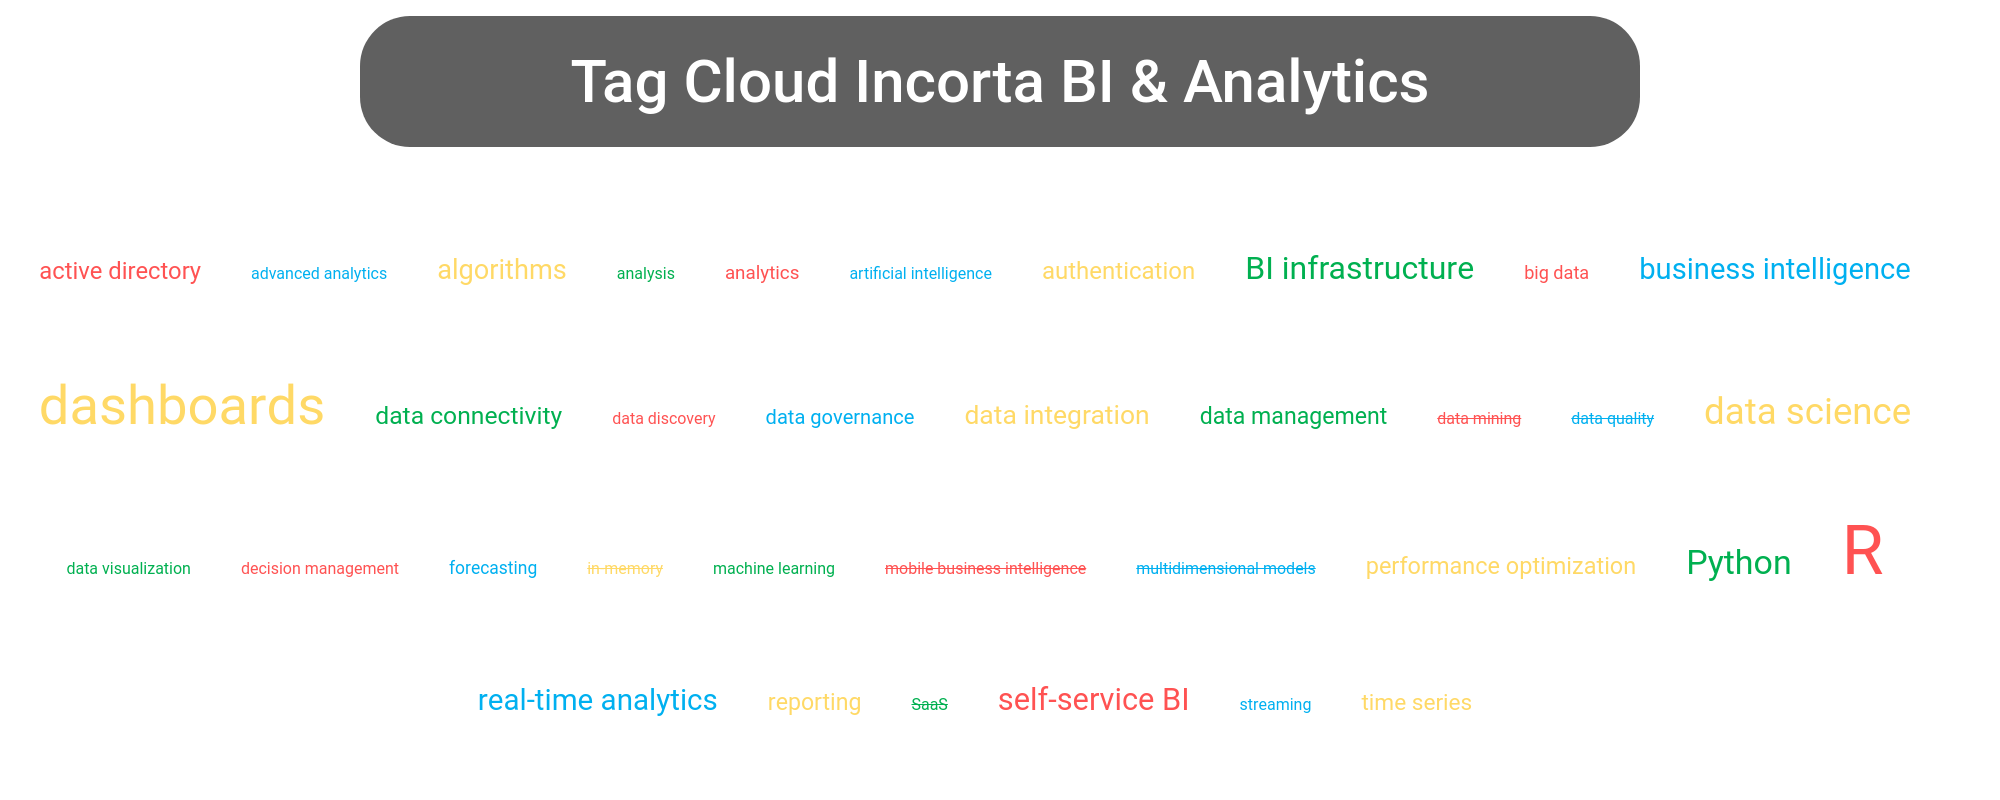 Tag cloud of the Incorta Analytics tools.